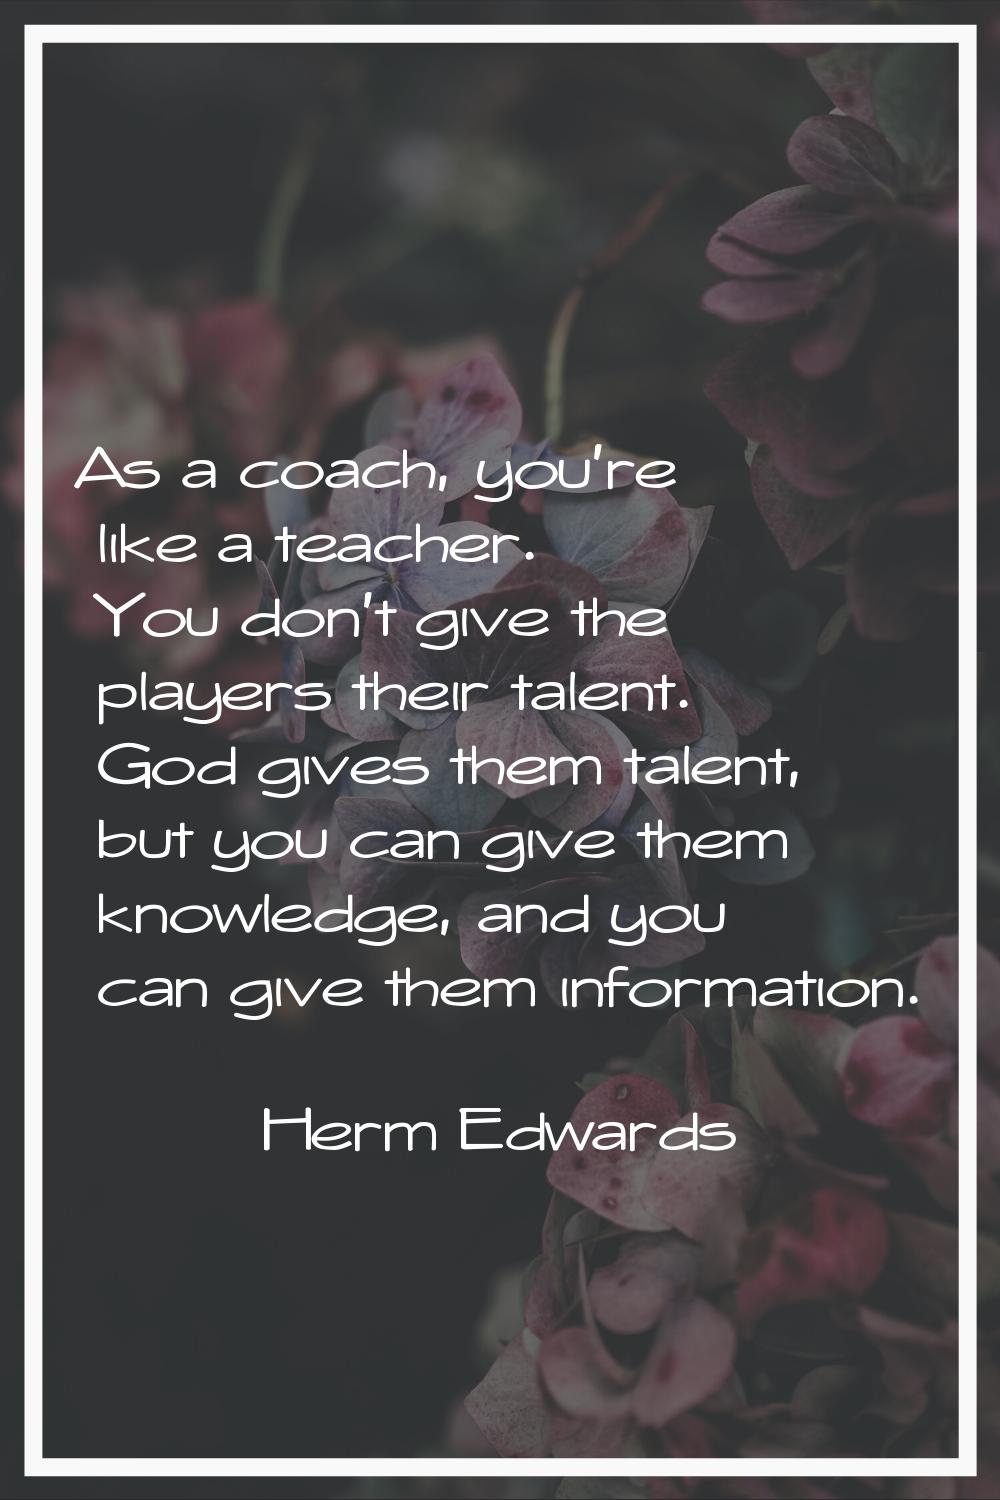 As a coach, you're like a teacher. You don't give the players their talent. God gives them talent, 